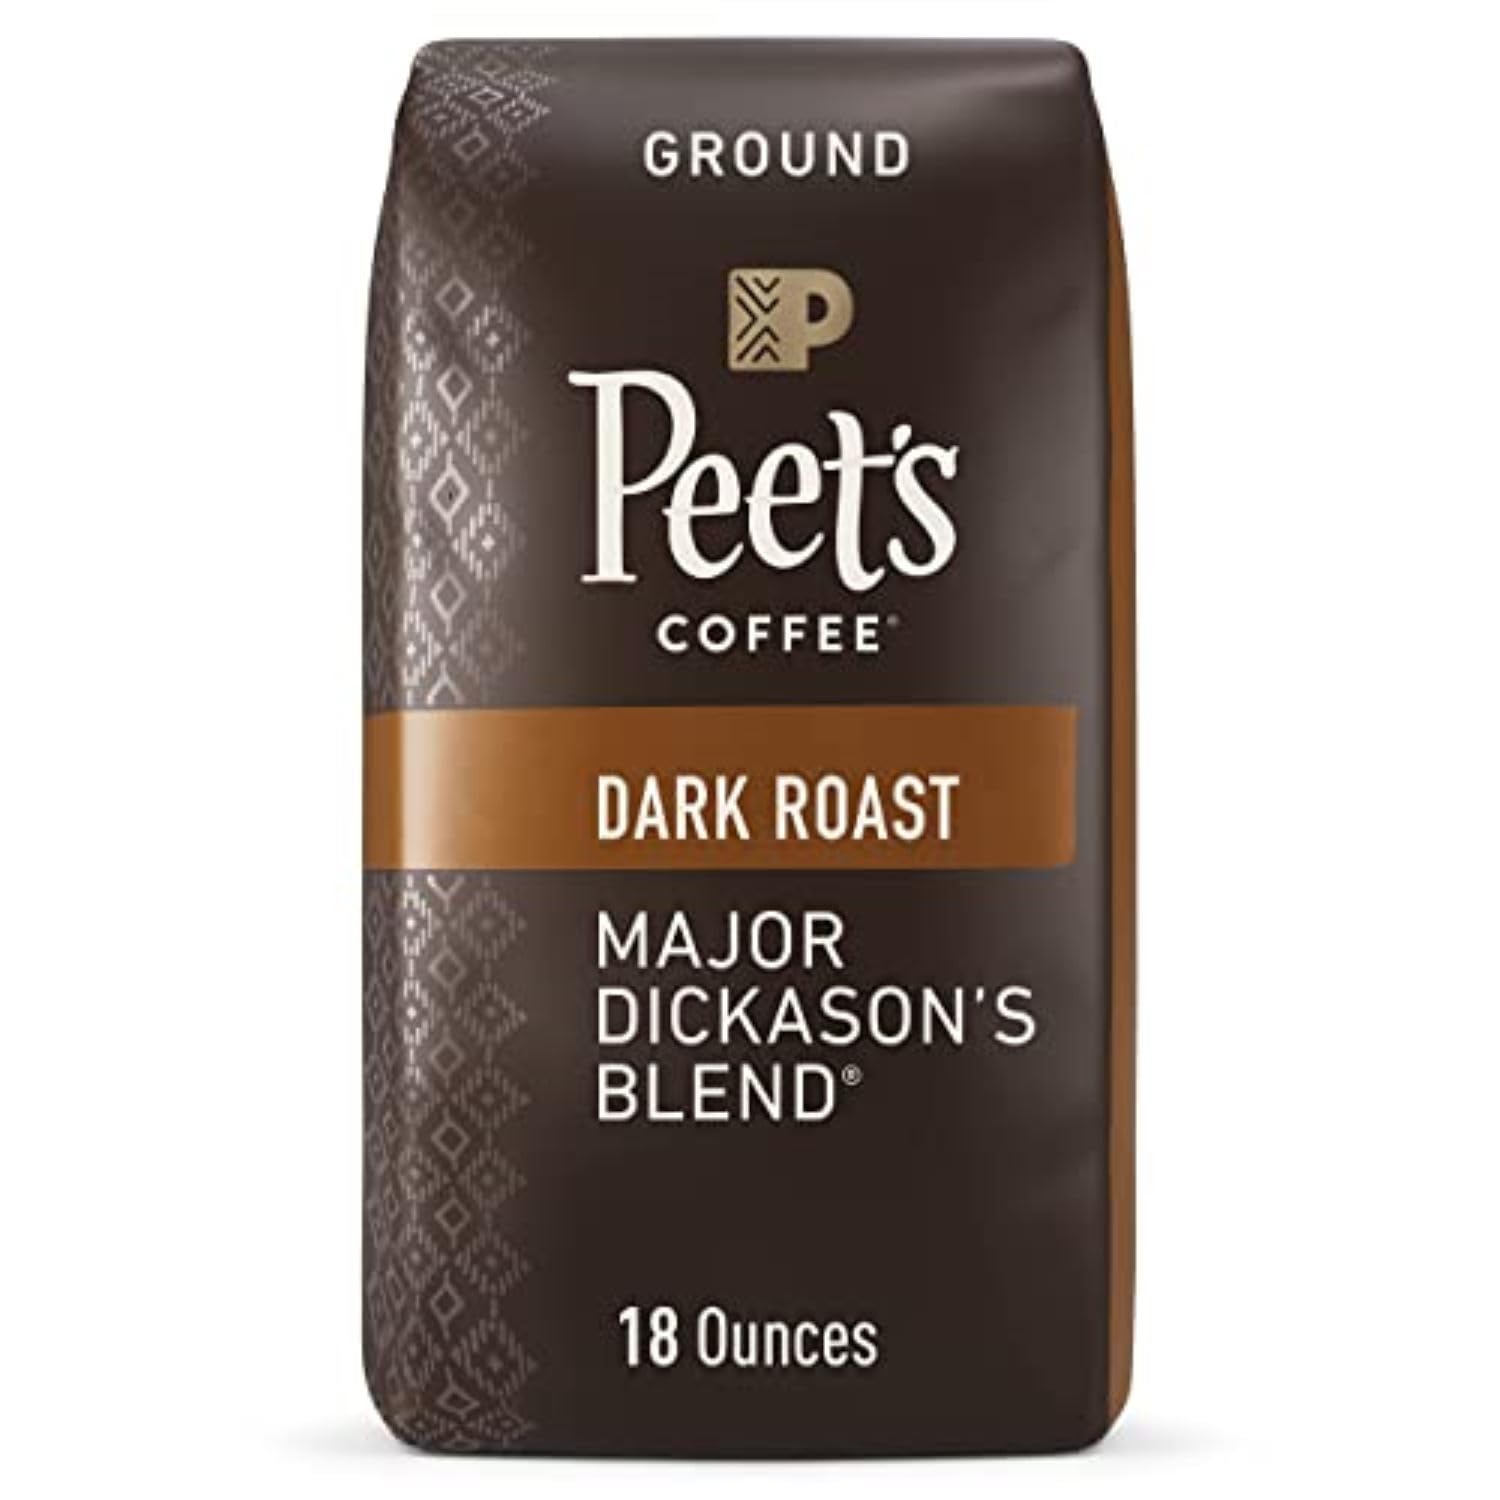 I make this with a coffee cone. I tried this in the french press but it was too strong..although I may just have alter the amount of coffee used. Dark,Excellent, flavorful coffee.